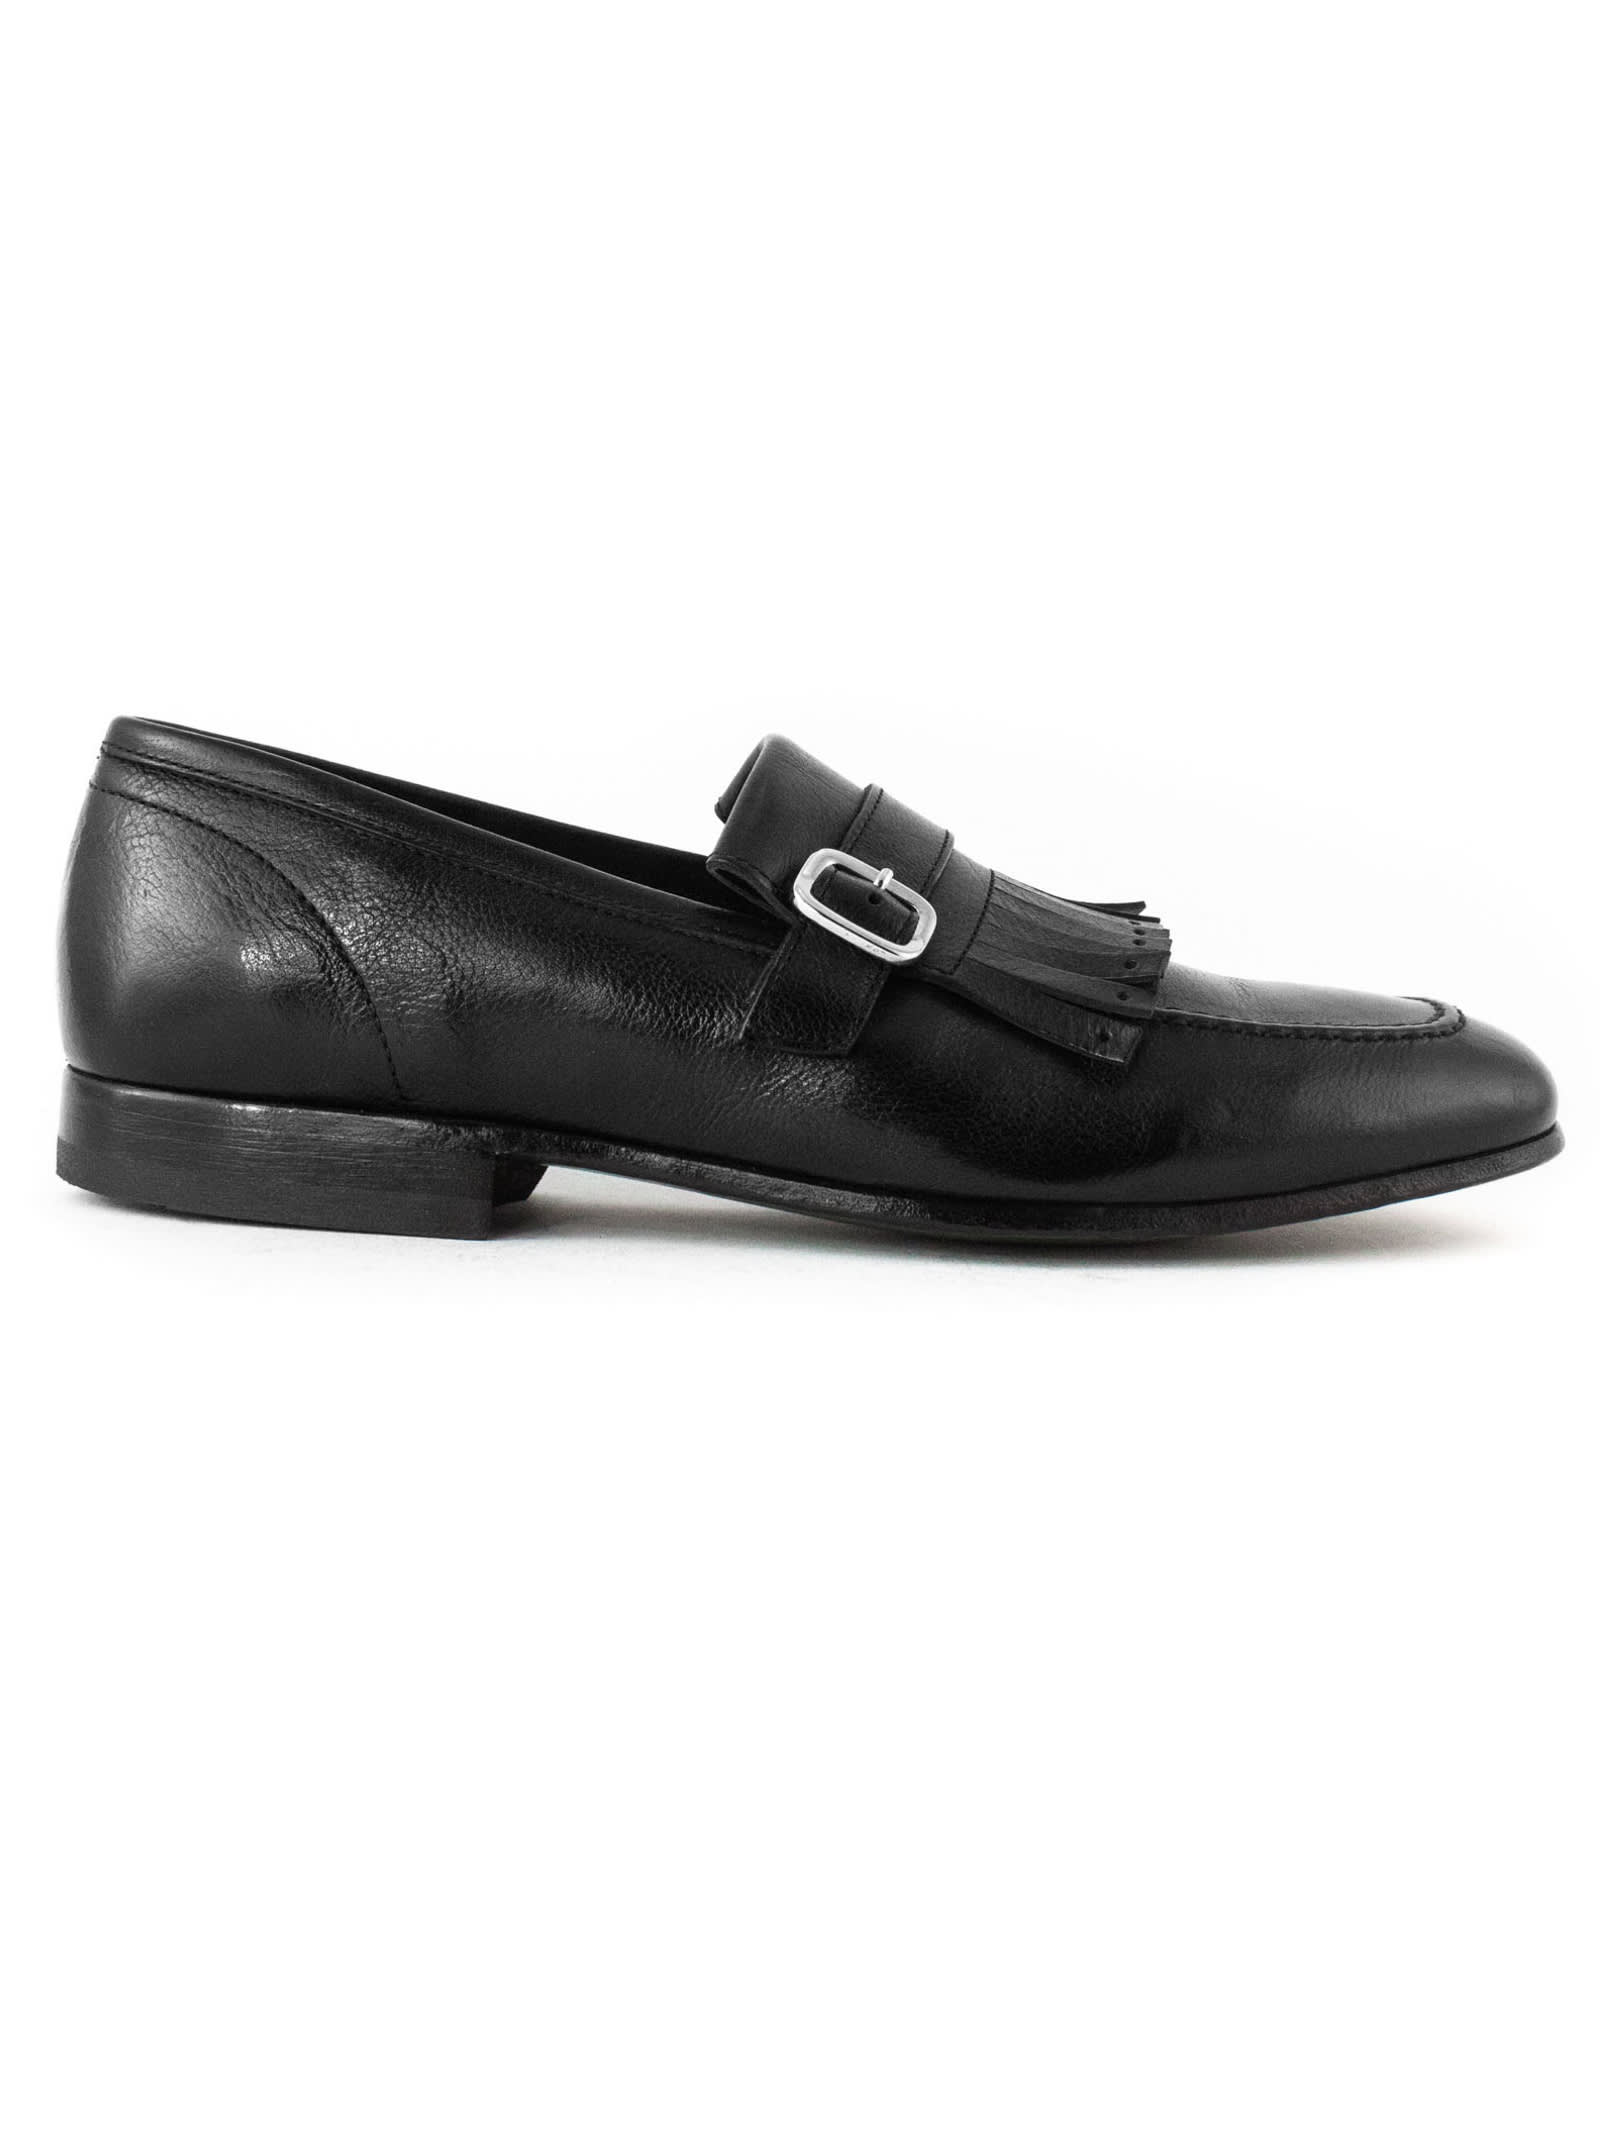 GREEN GEORGE BLACK LEATHER LOAFER